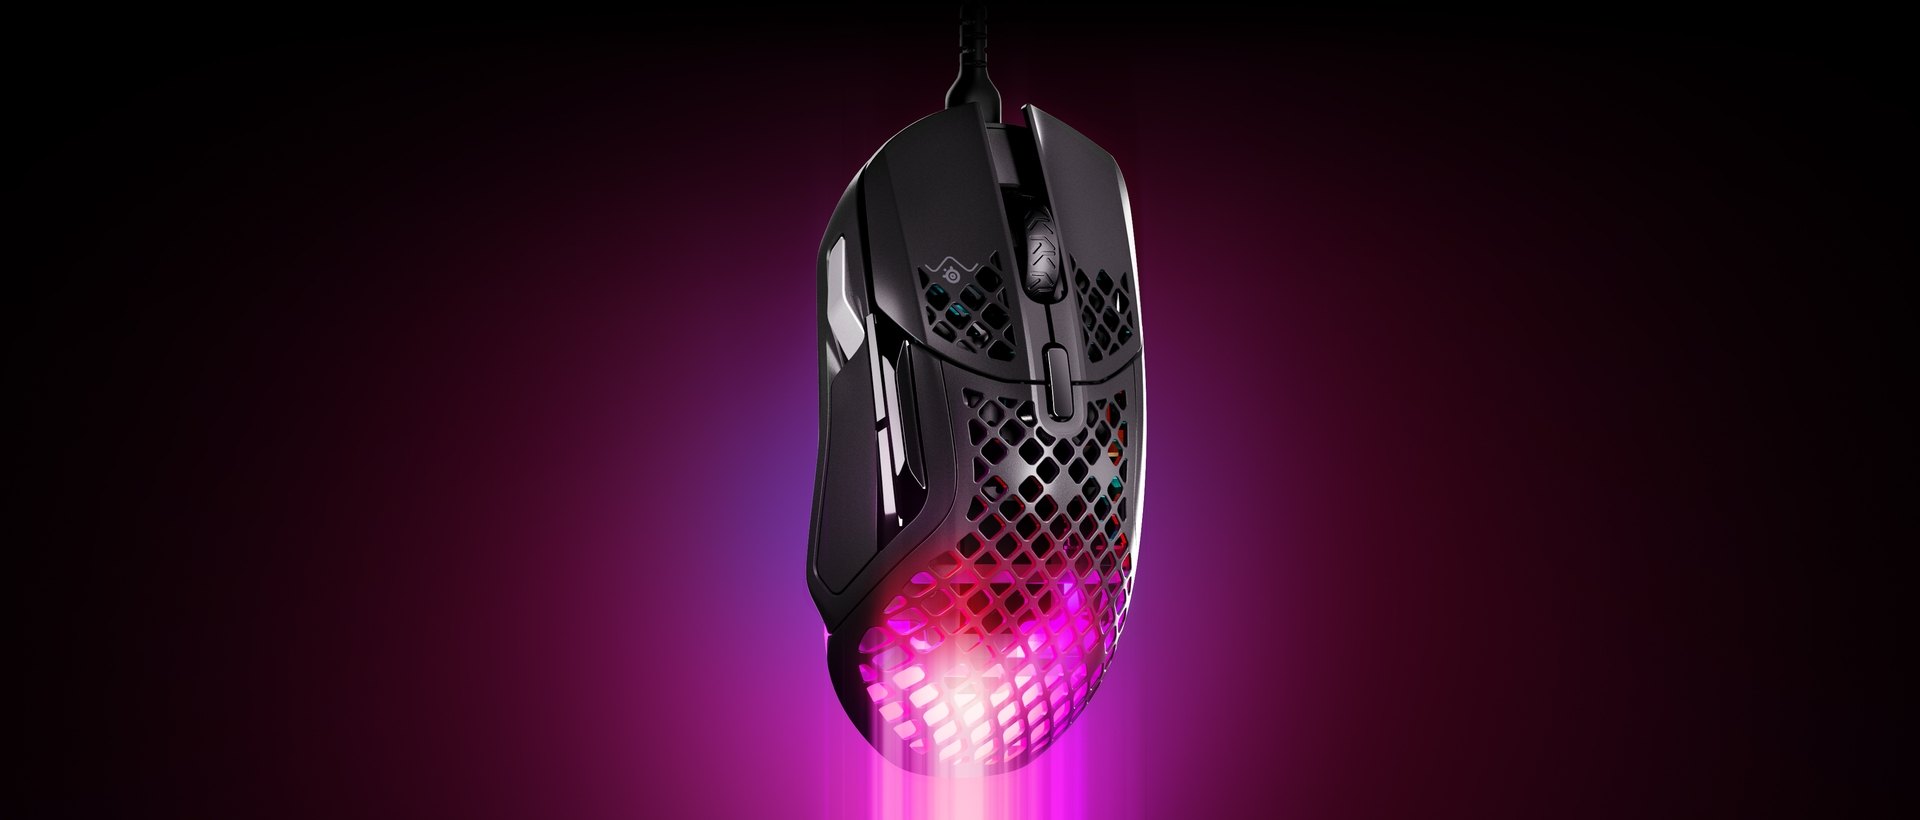 An Aerox 5 mouse with light beaming from the body.